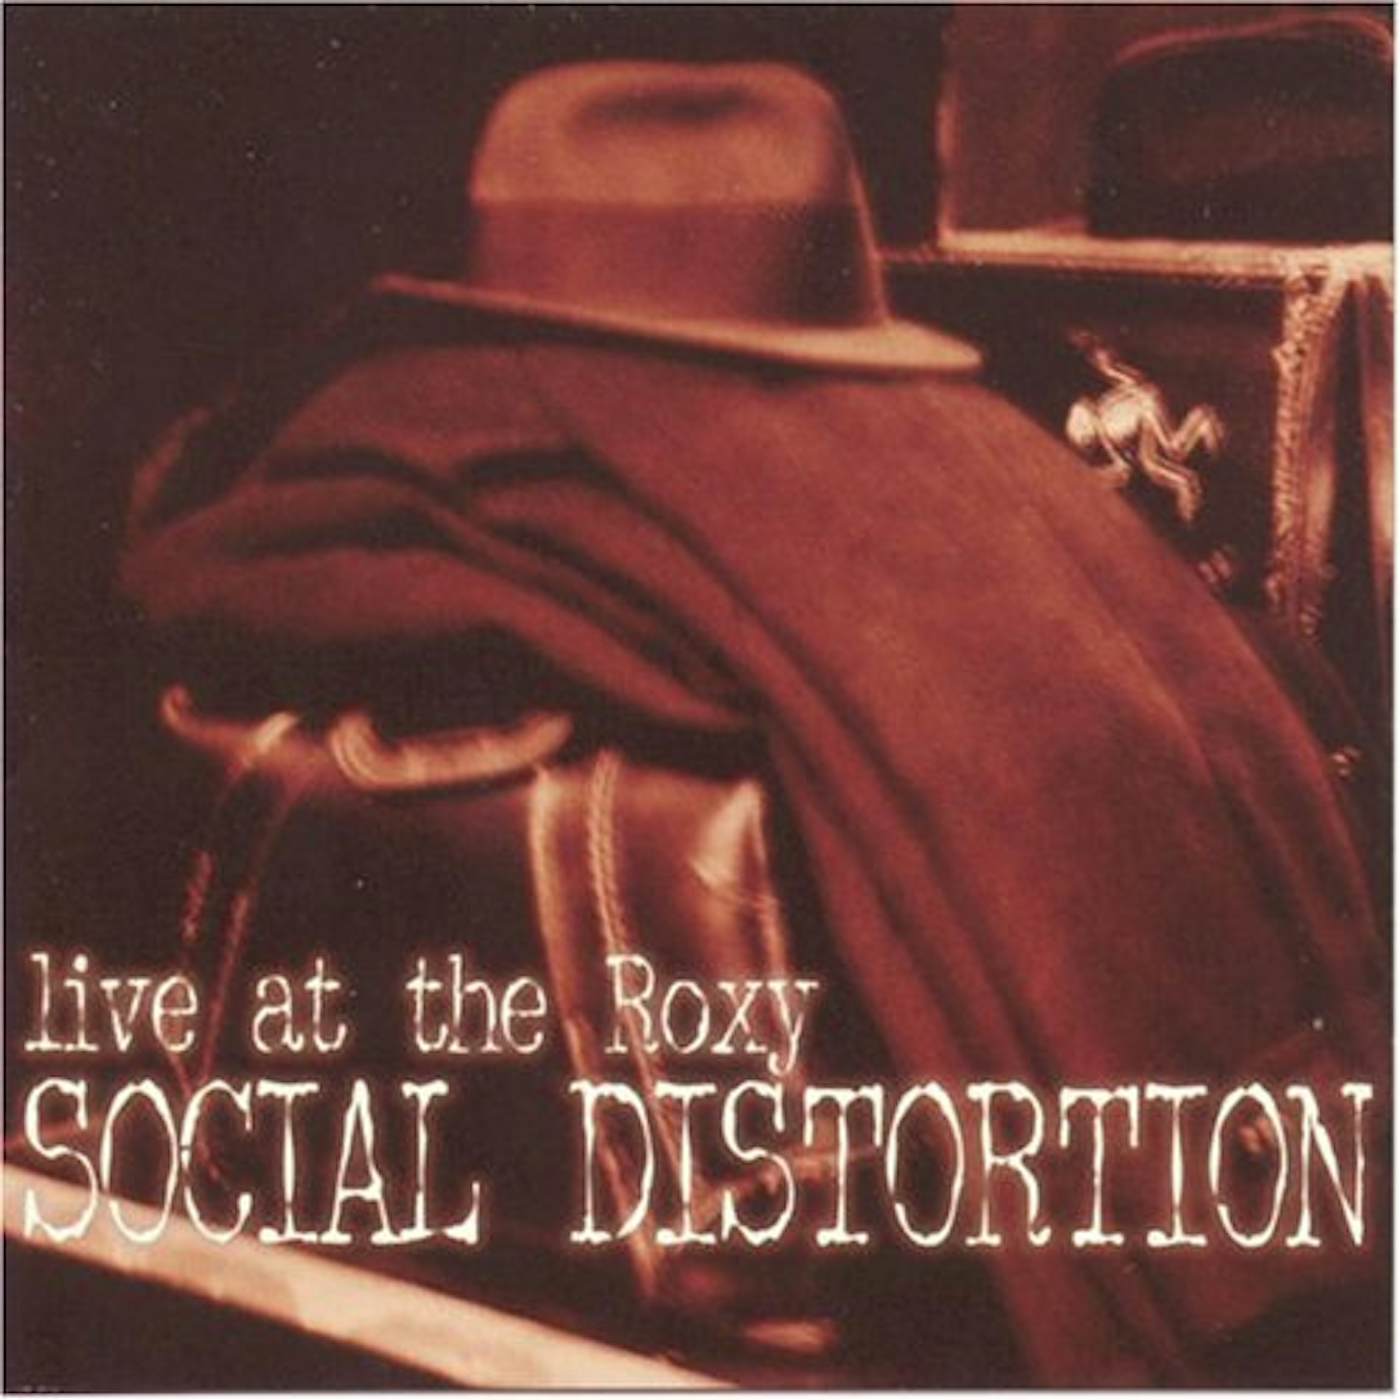 Social Distortion LIVE AT THE ROXY CD